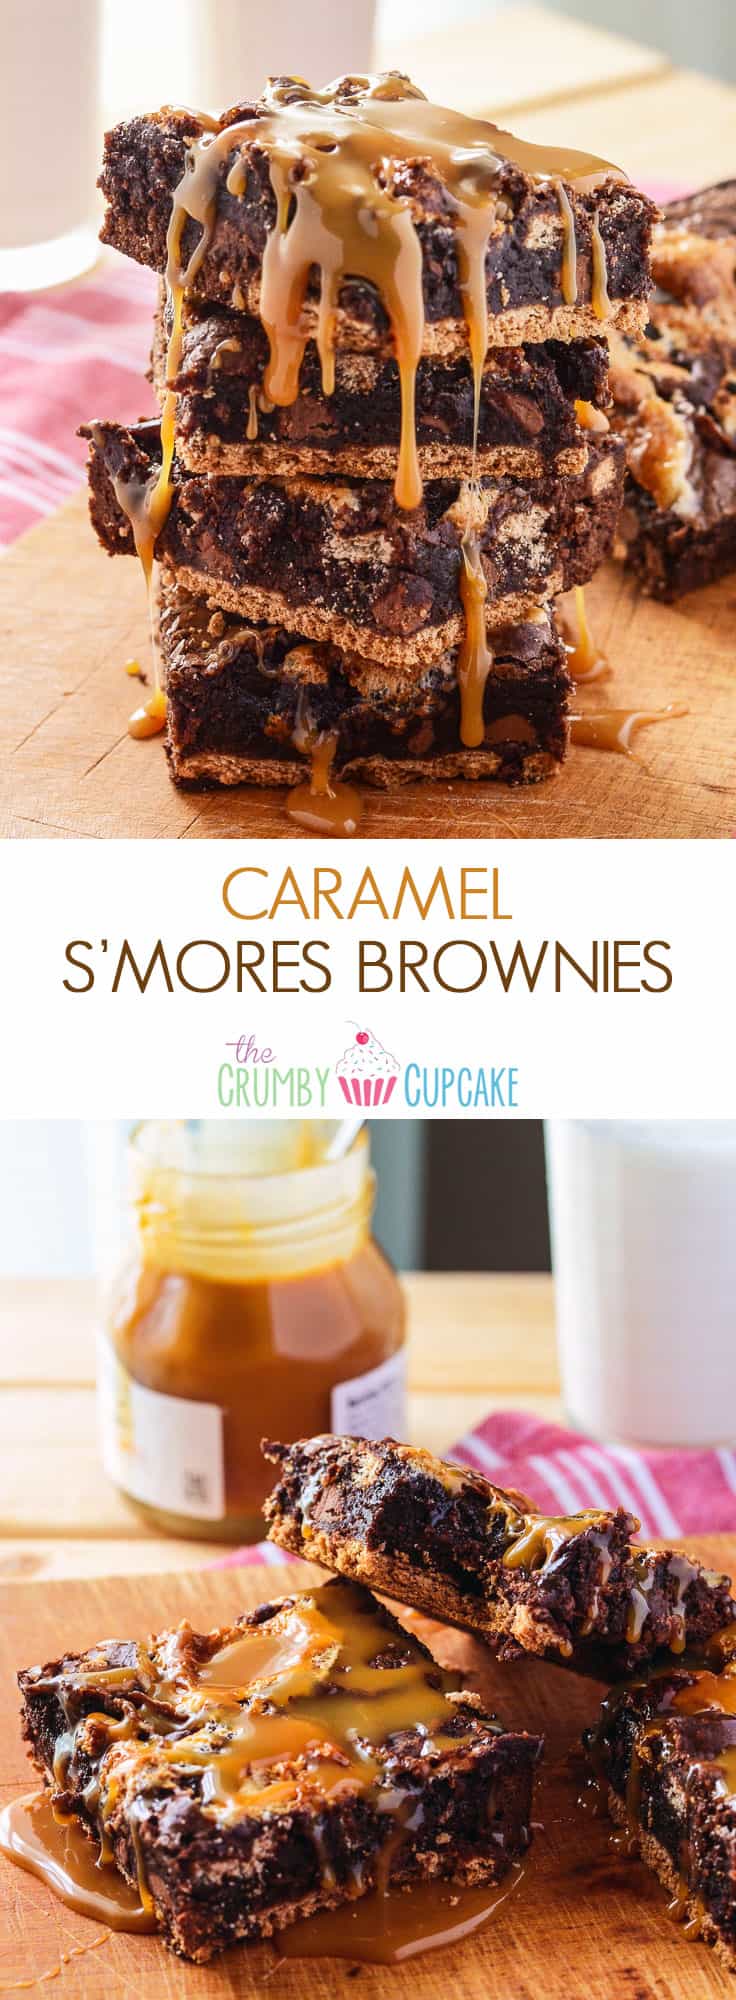 Caramel S'mores Brownies | Amazingly easy gooey s'mores brownies, stuffed with caramel, chocolate chunks & marshmallow, set on a graham cracker crust & drizzled with more caramel.